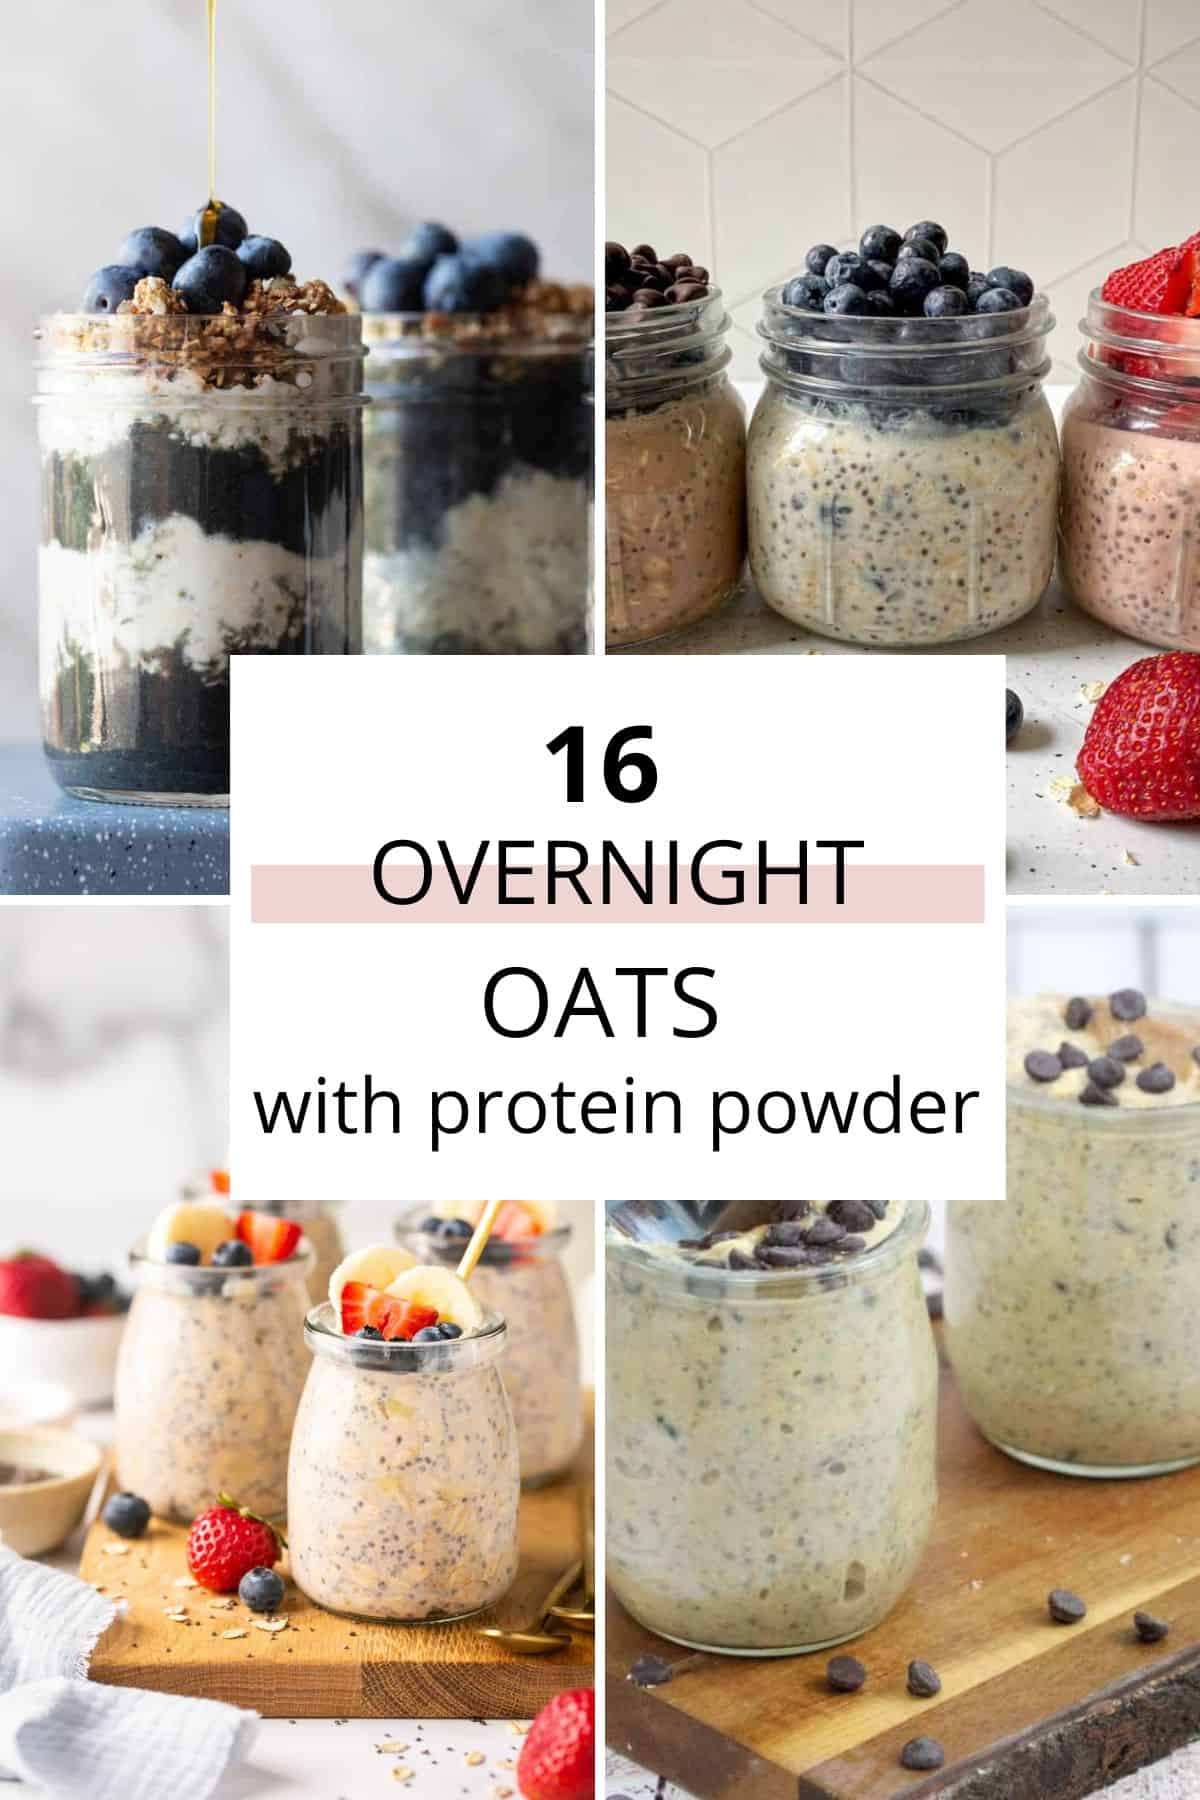 16 Overnight Oat Recipes That Are Made With Protein Powder